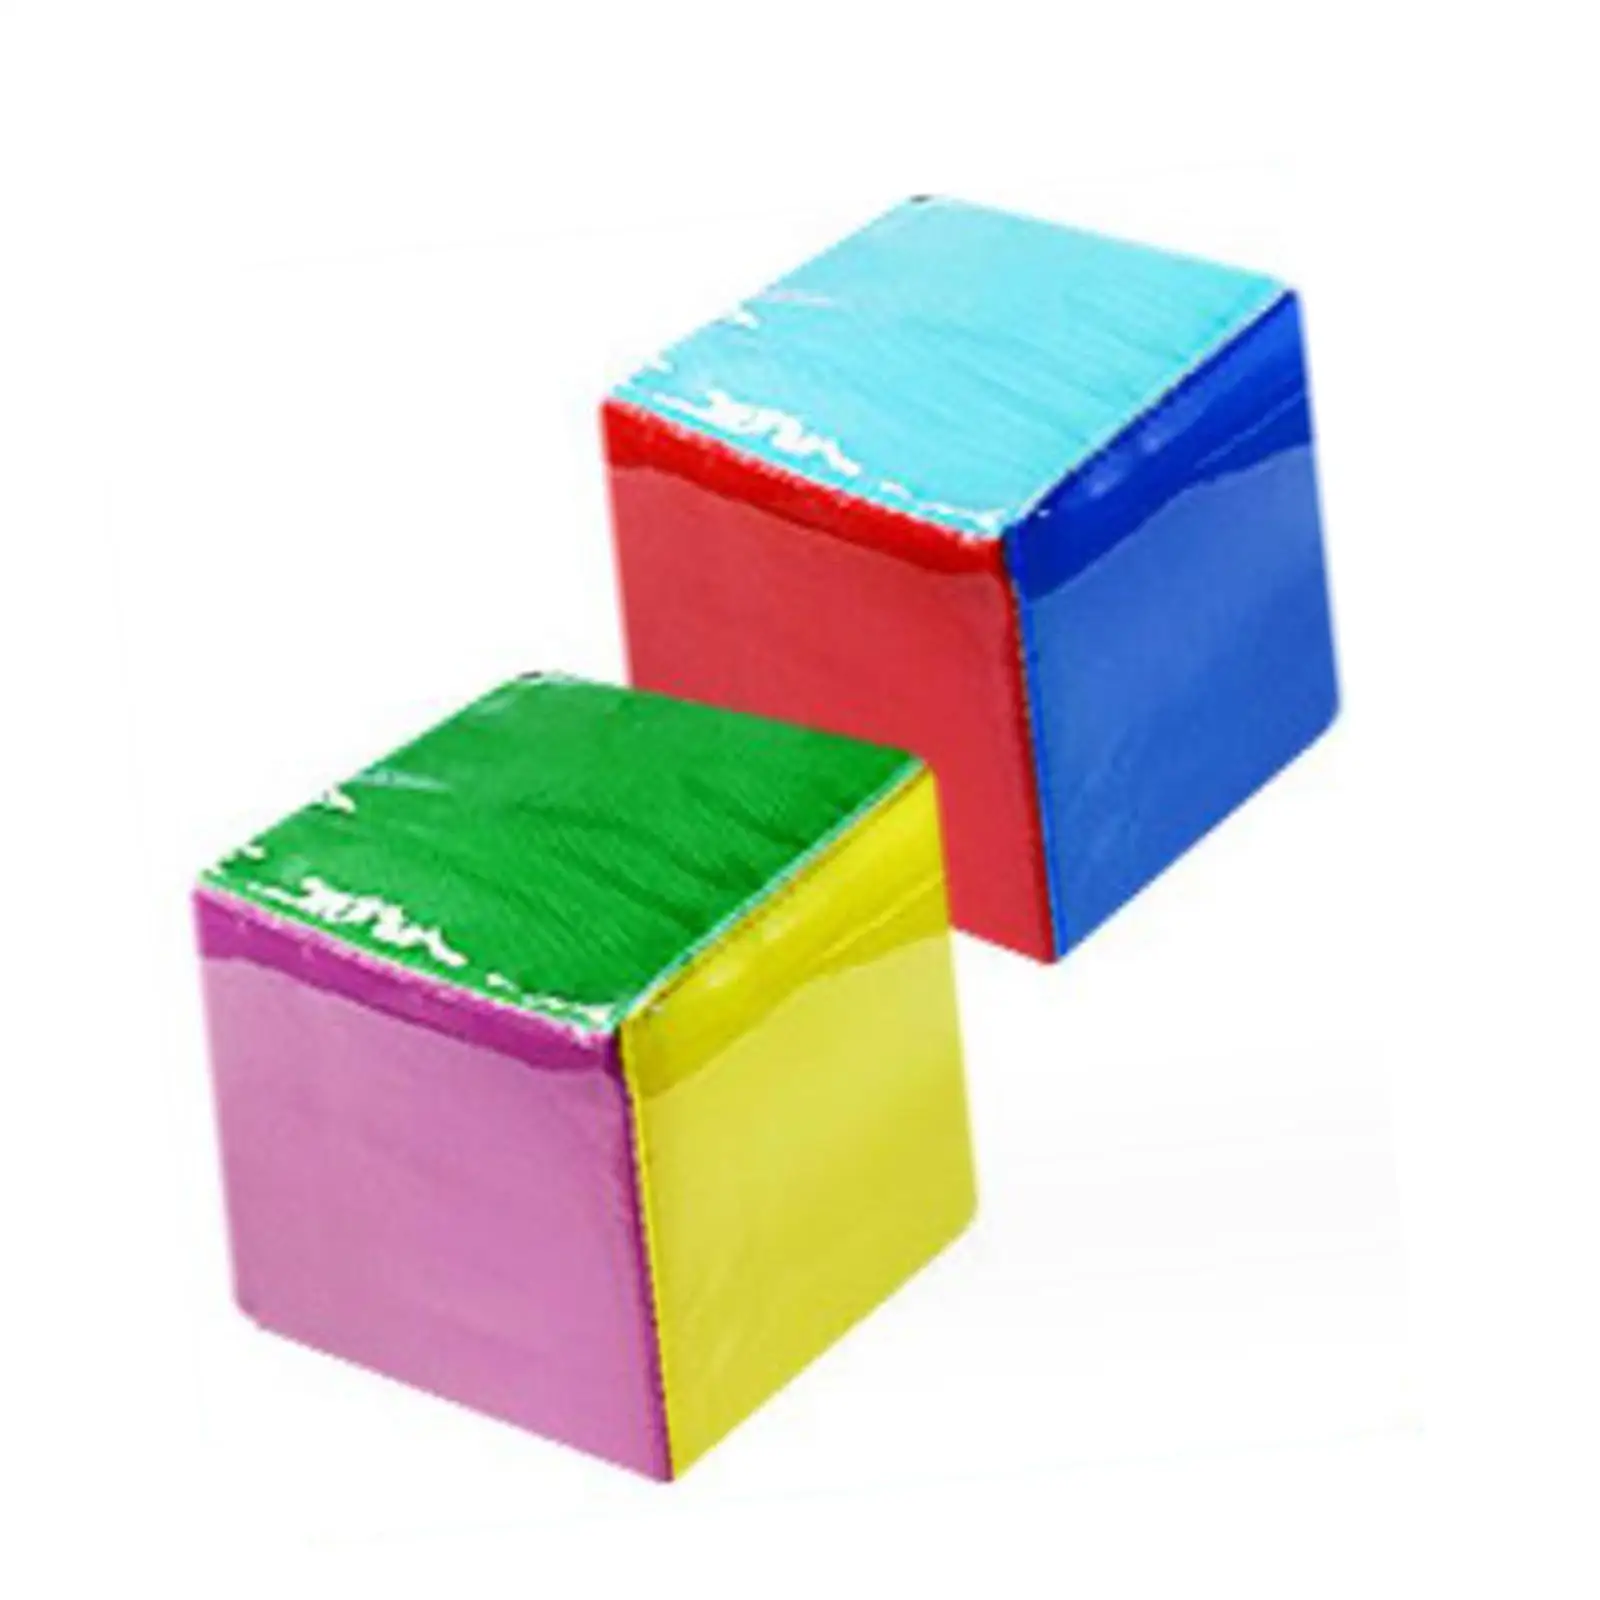 Soft Pocket Cubes 3.94 inch Large Dice Plush Cube with Clear Pocket for Kindergarten Birthday Gift 3.94 x 3.94 x 3.94Inches